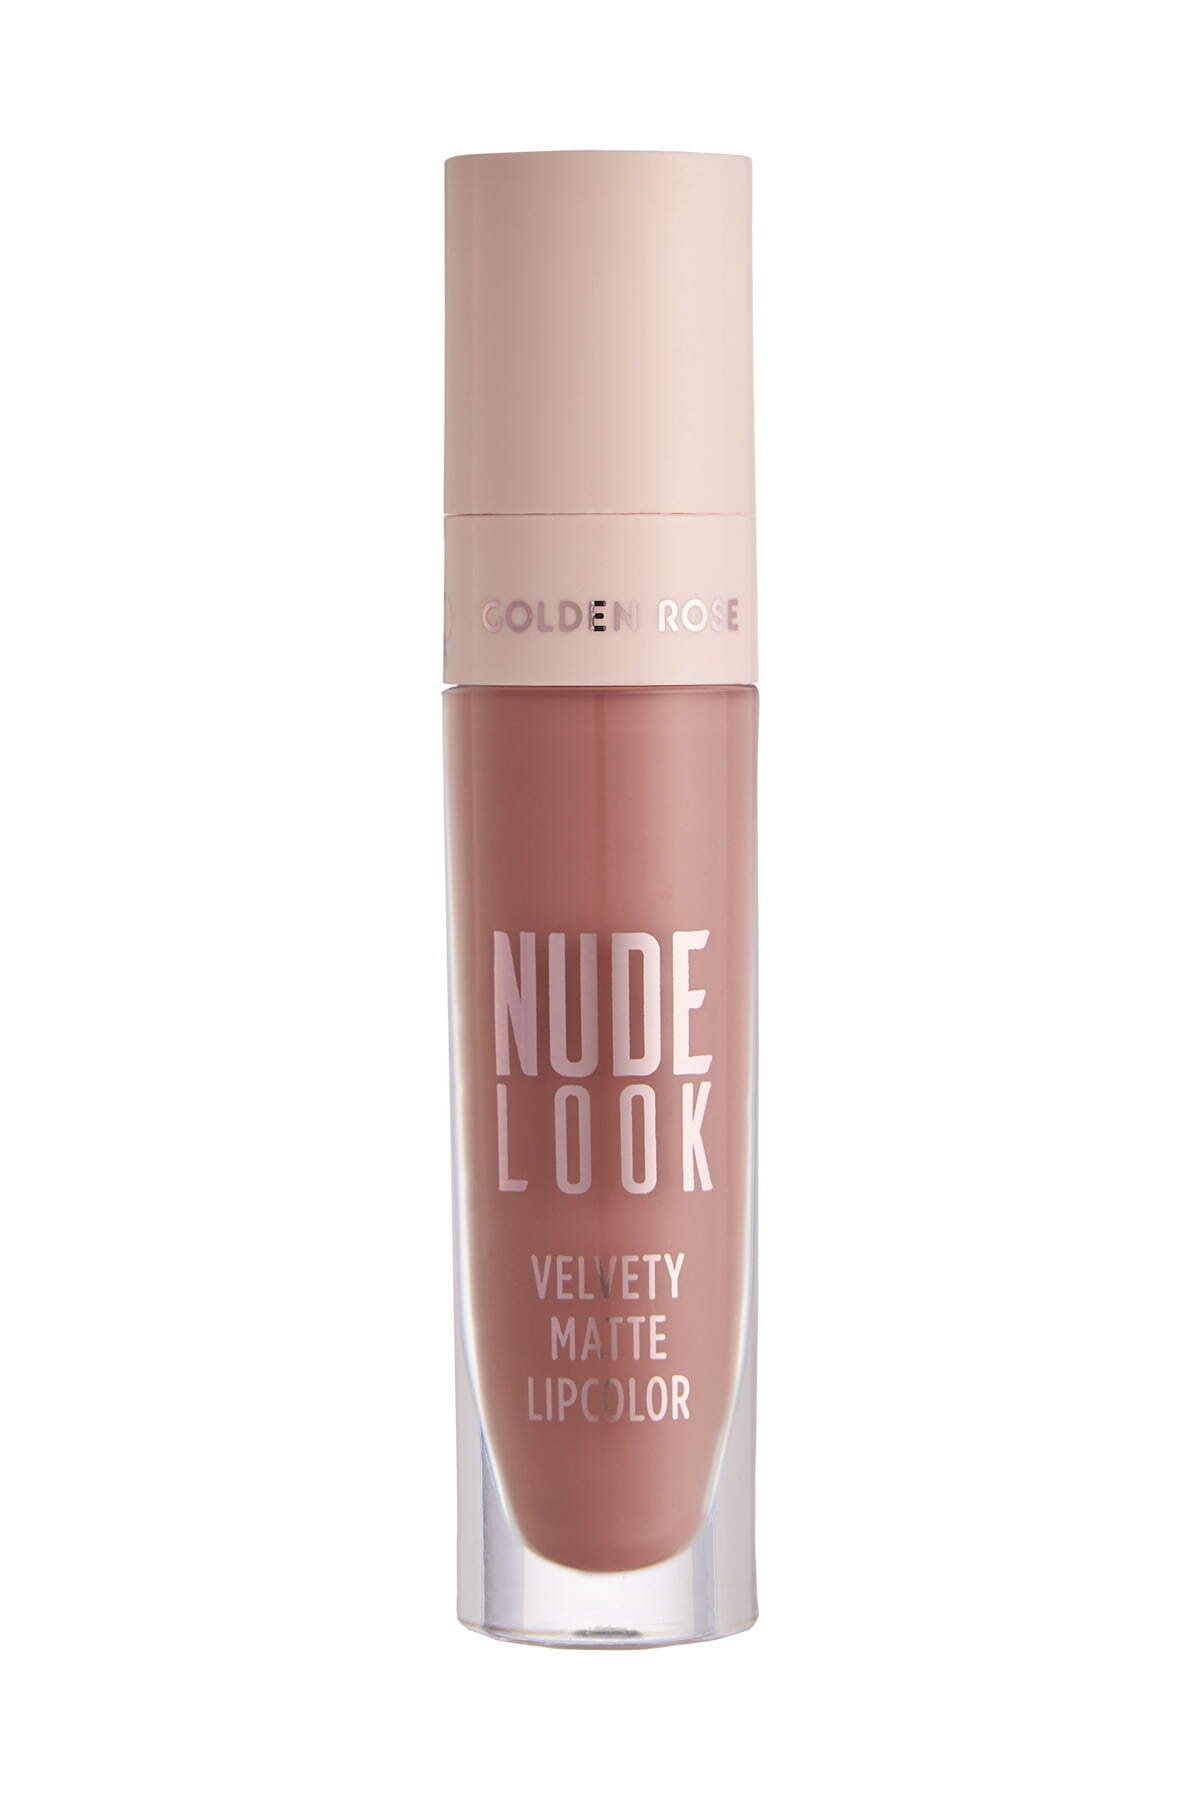 Golden Rose Nude Look Velvety Matte Lipcolor No: 02 Peachy Nude - Likit Mat Ruj